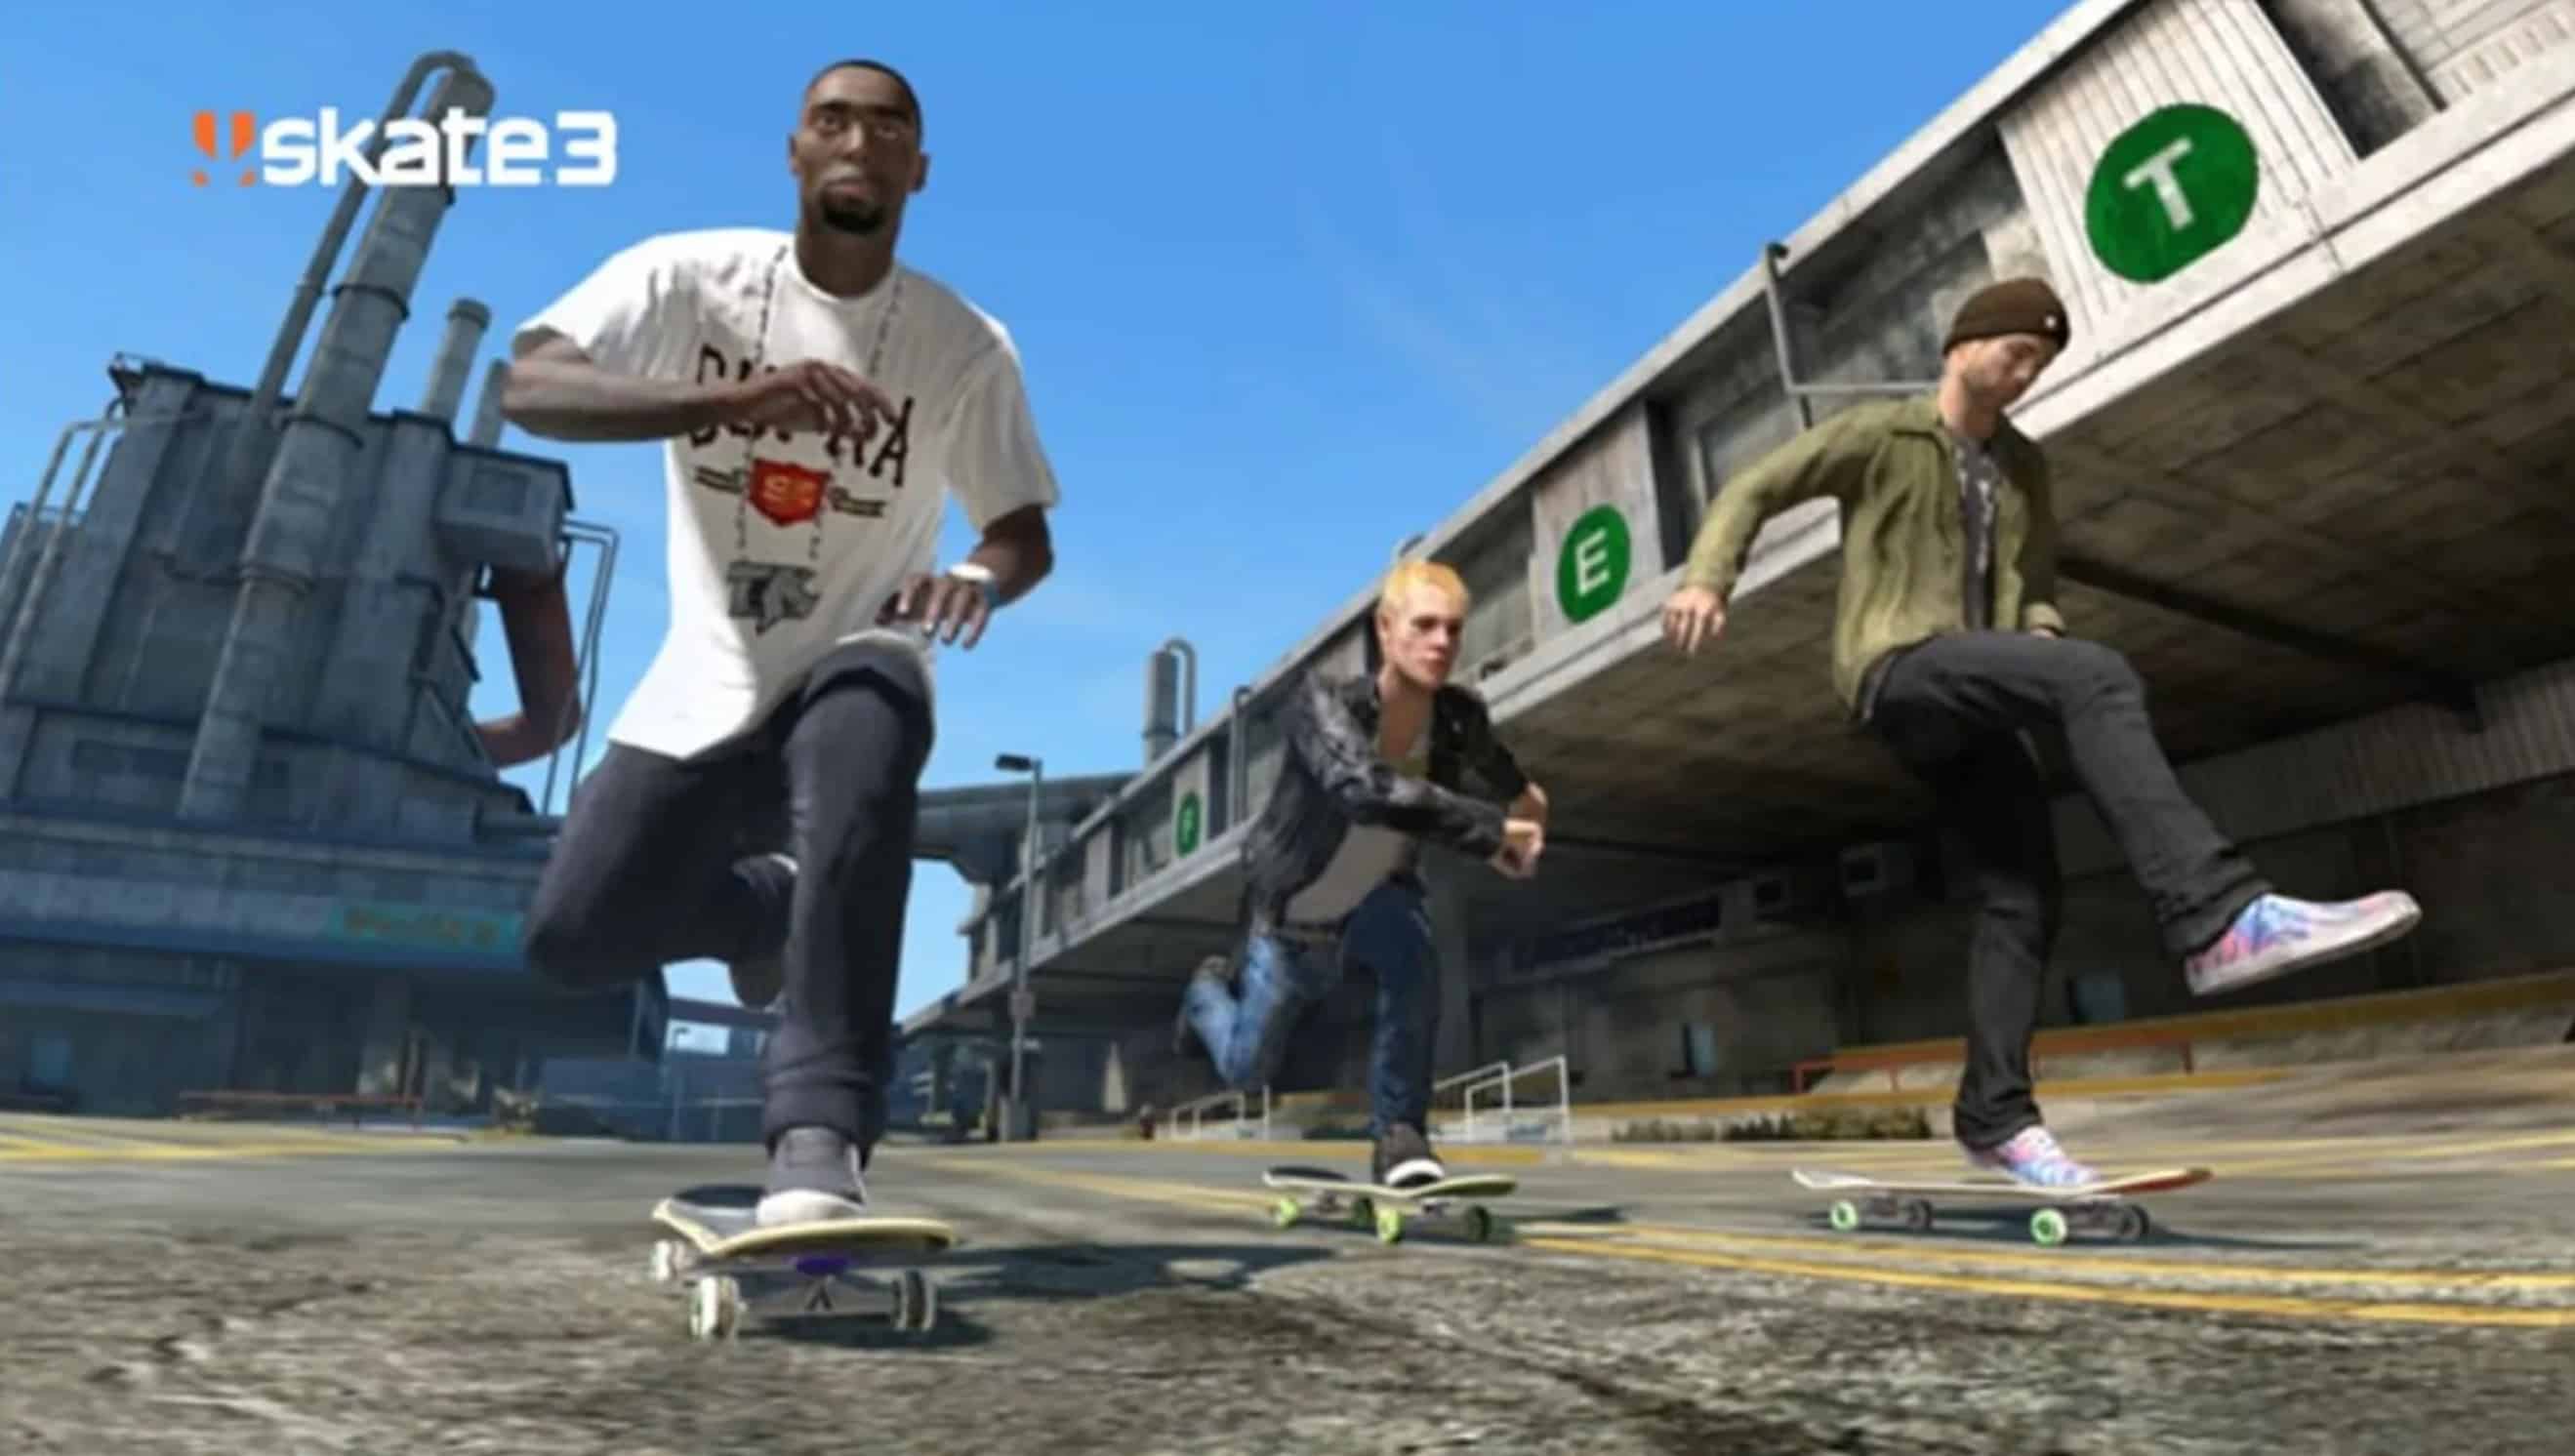 EA rolling out new Skate 4 playtest in July: How to register